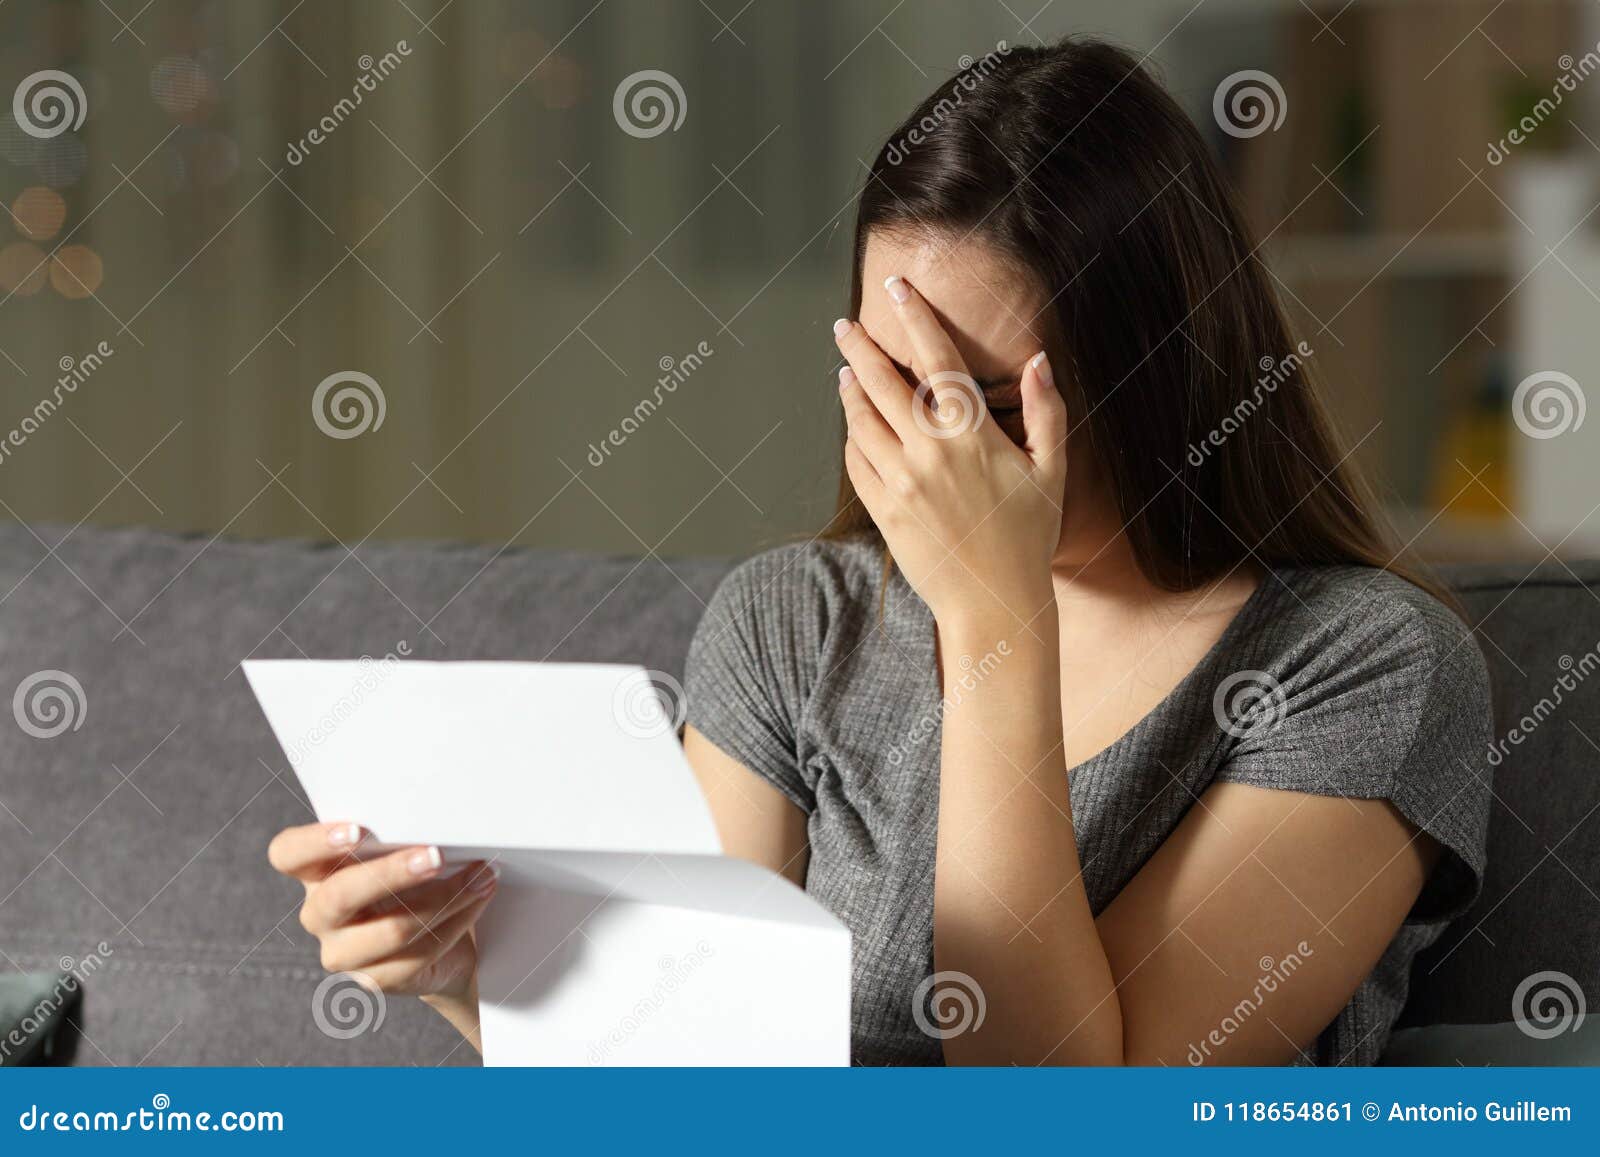 sad woman reading a letter in the dark